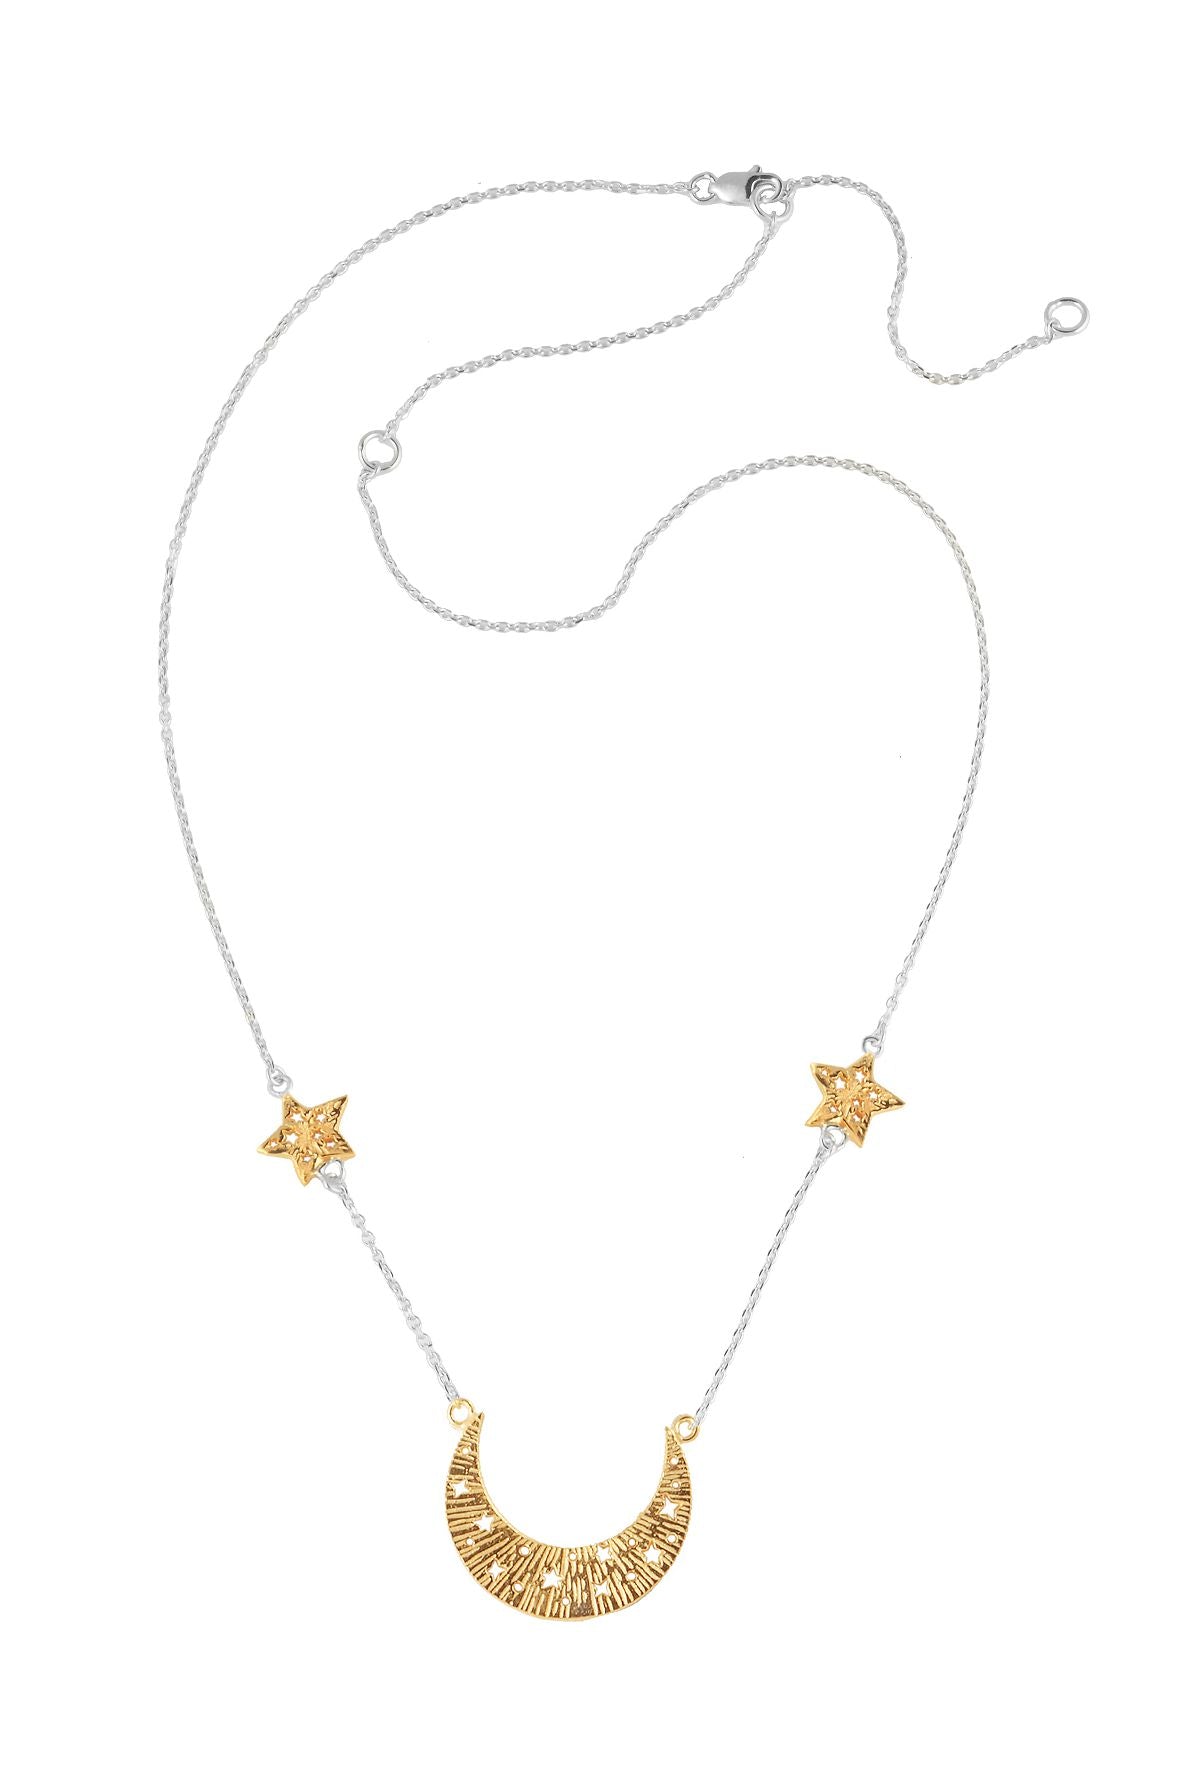 Moon swing with 2 stars on the chain necklace. Silver, partly gold-plated